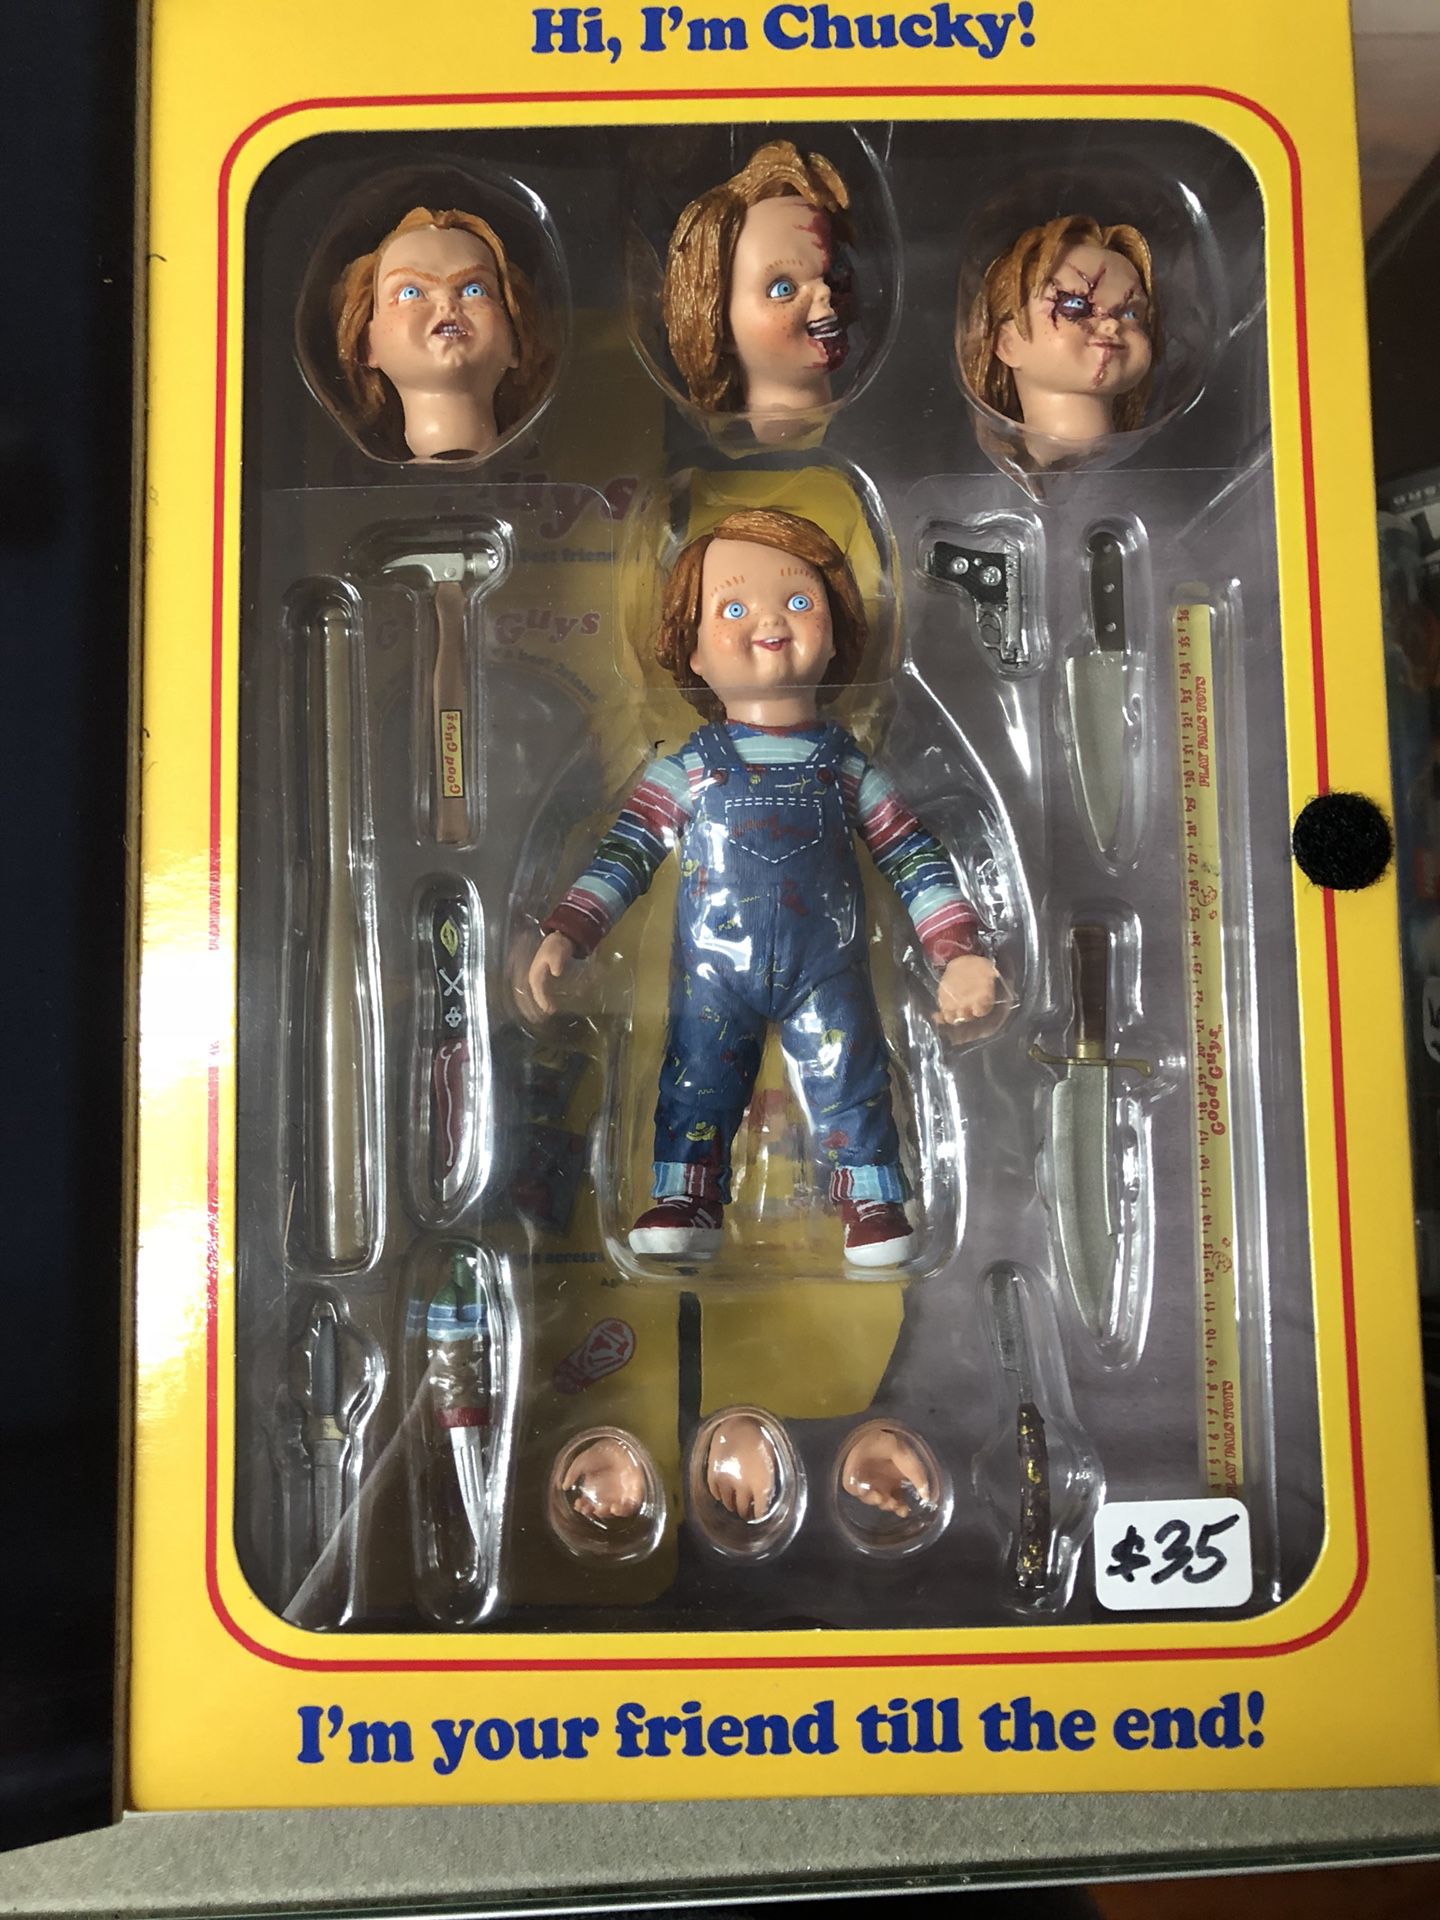 Ultimate Chucky Good Guys Child’s Play NECA Reel Toys 4” Inch Action Figure